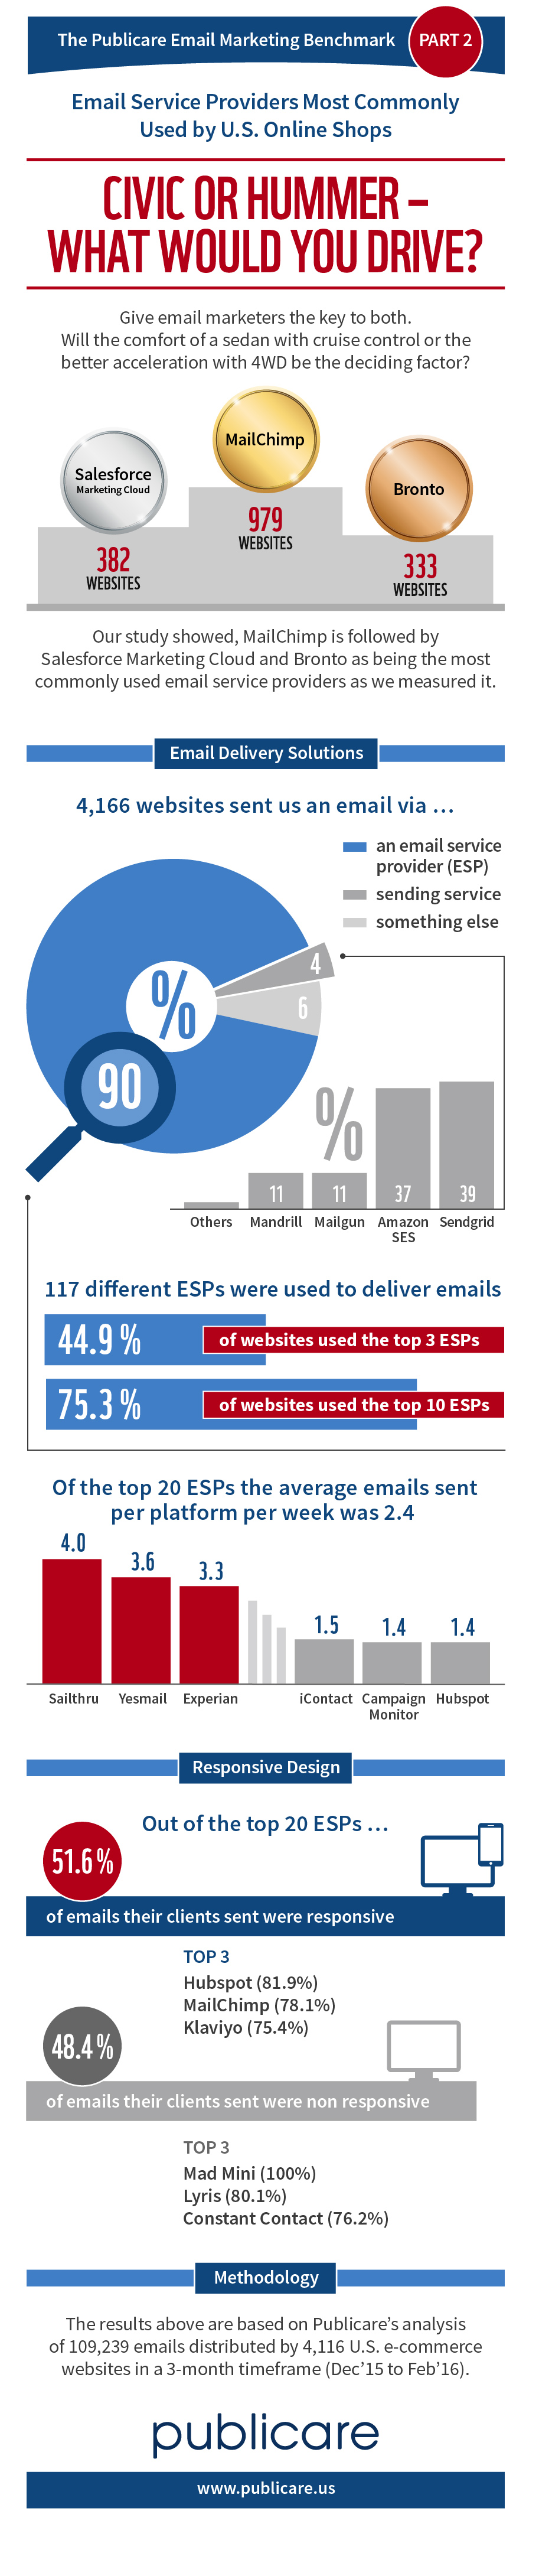 Email Service Providers most commonly used by U.S. online shops